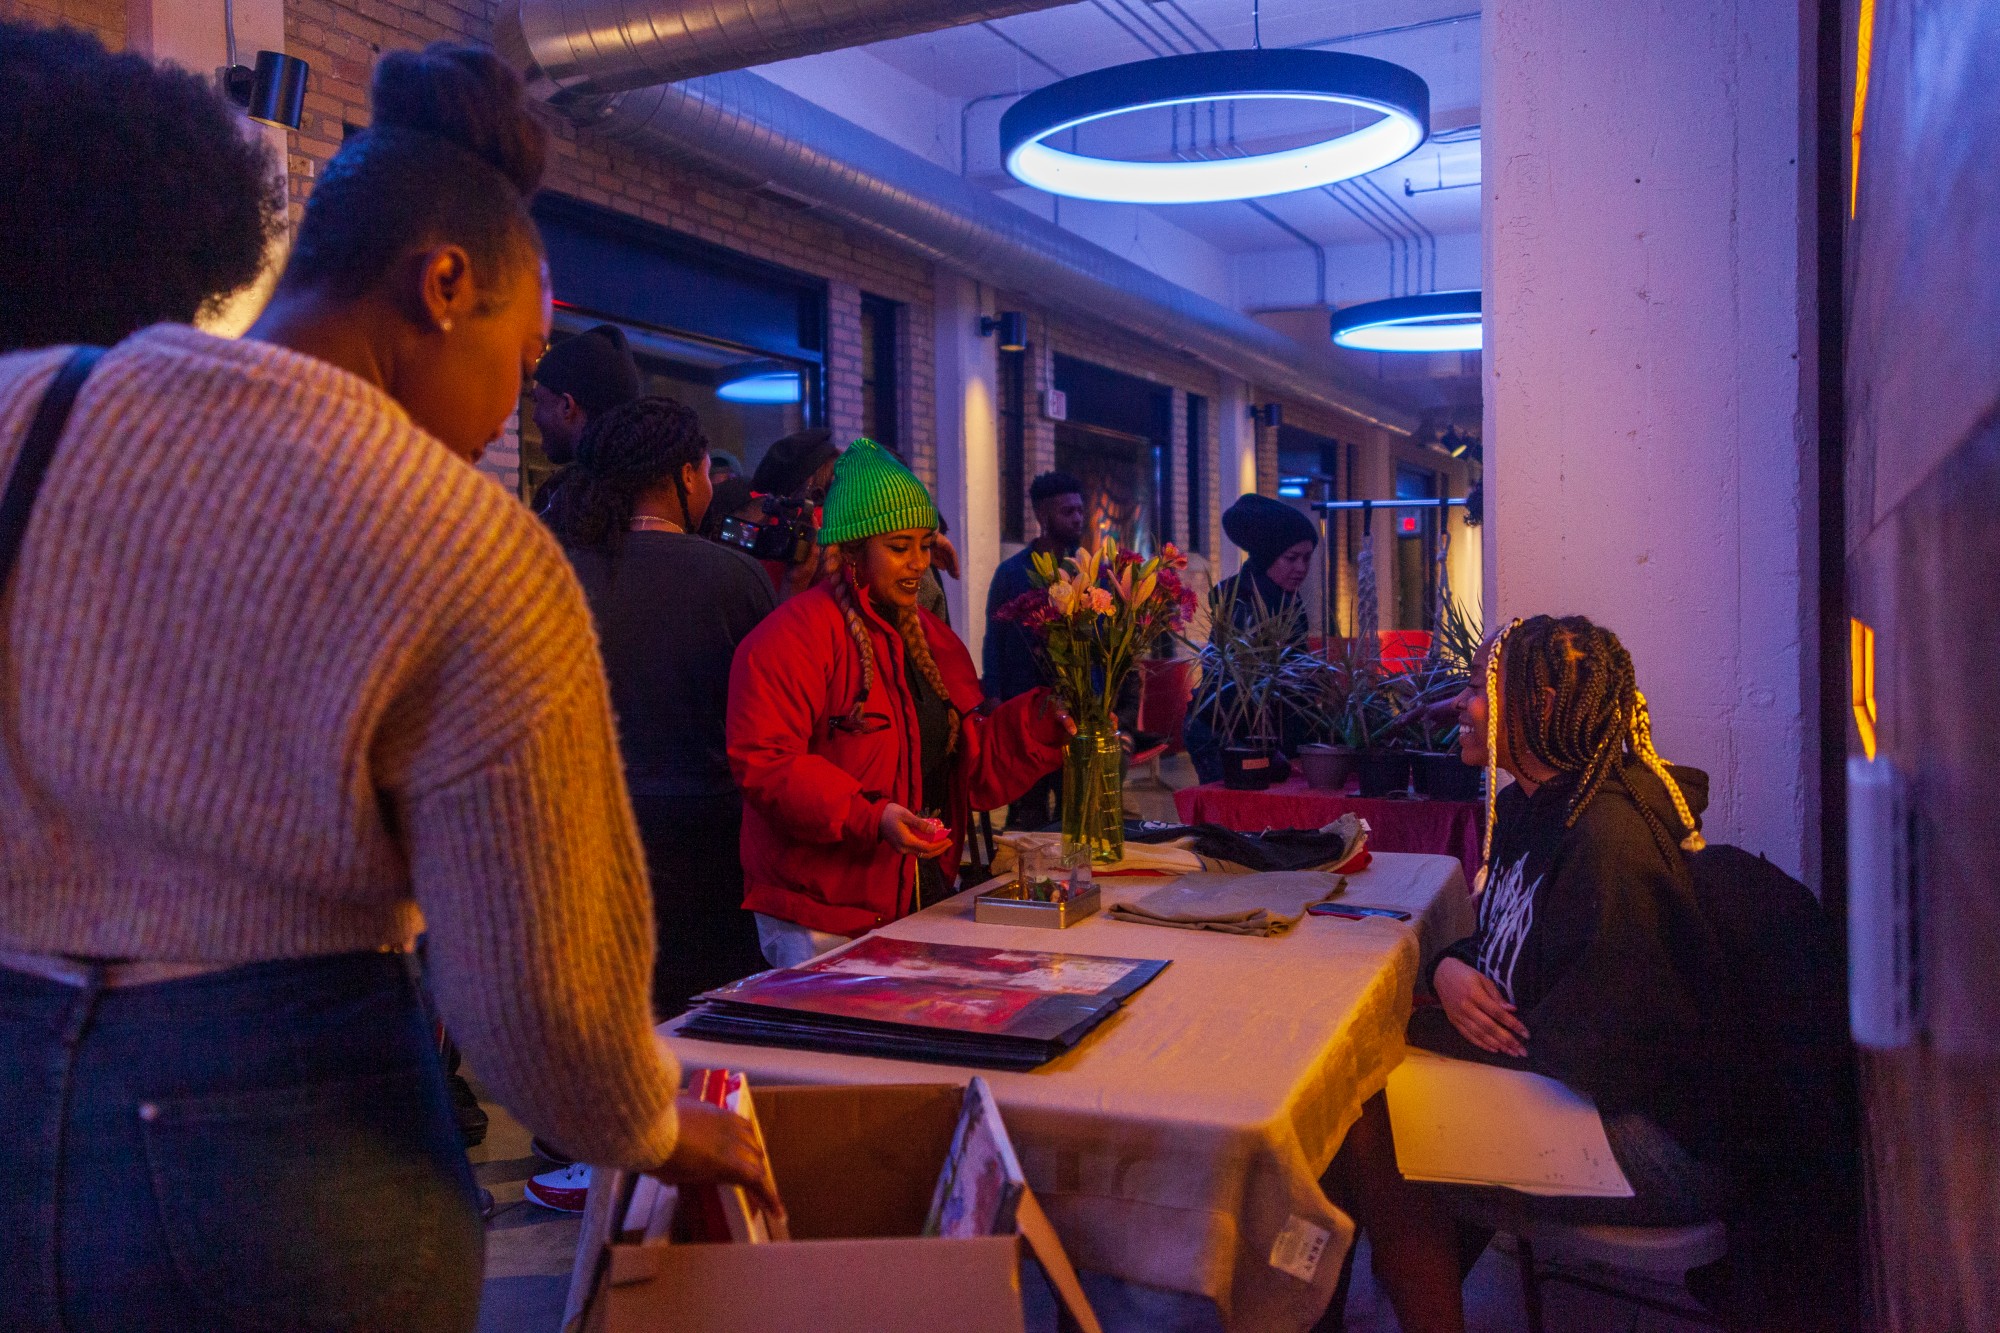 Attendees mingle with the artists and vendors at the Tangible Thoughts Open Mic event at A-Mill Artist Lofts on Saturday, Feb. 15. The recurring event serves as a platform to highlight Black thought and expression in the Twin Cities.